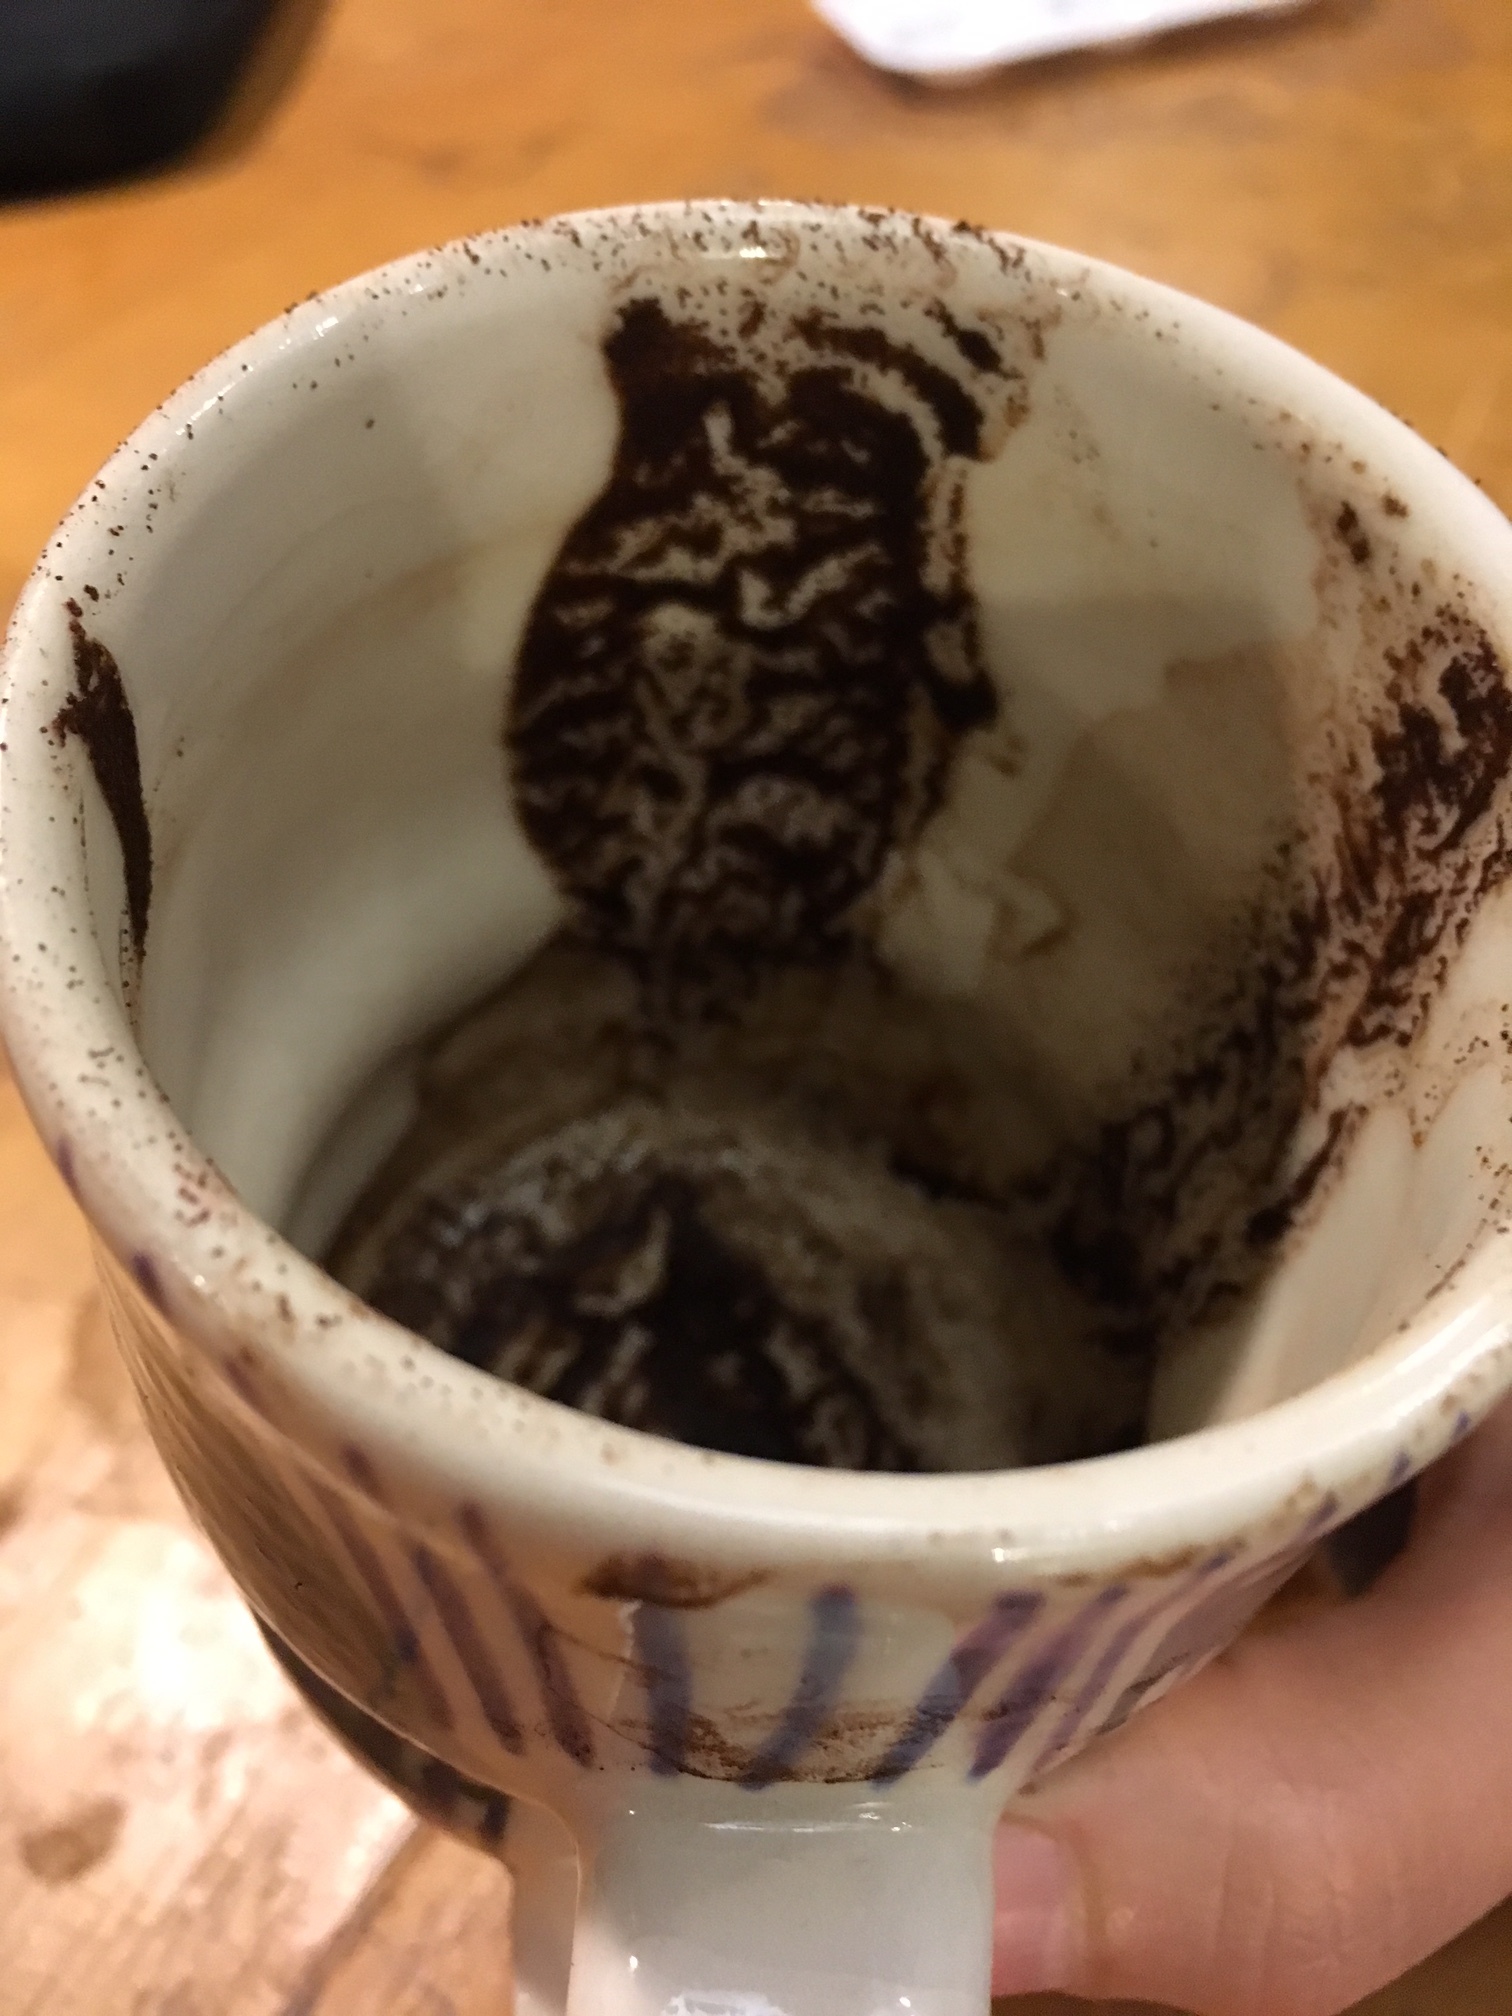   The Hum: Tasseography, the art of reading coffee grounds. (An owl in the grounds.)    The Hum  is a socially engaged artwork that integrates and adapts the coffee house model for co-learning, co-creating, and co-working. Resilience resides in a wil